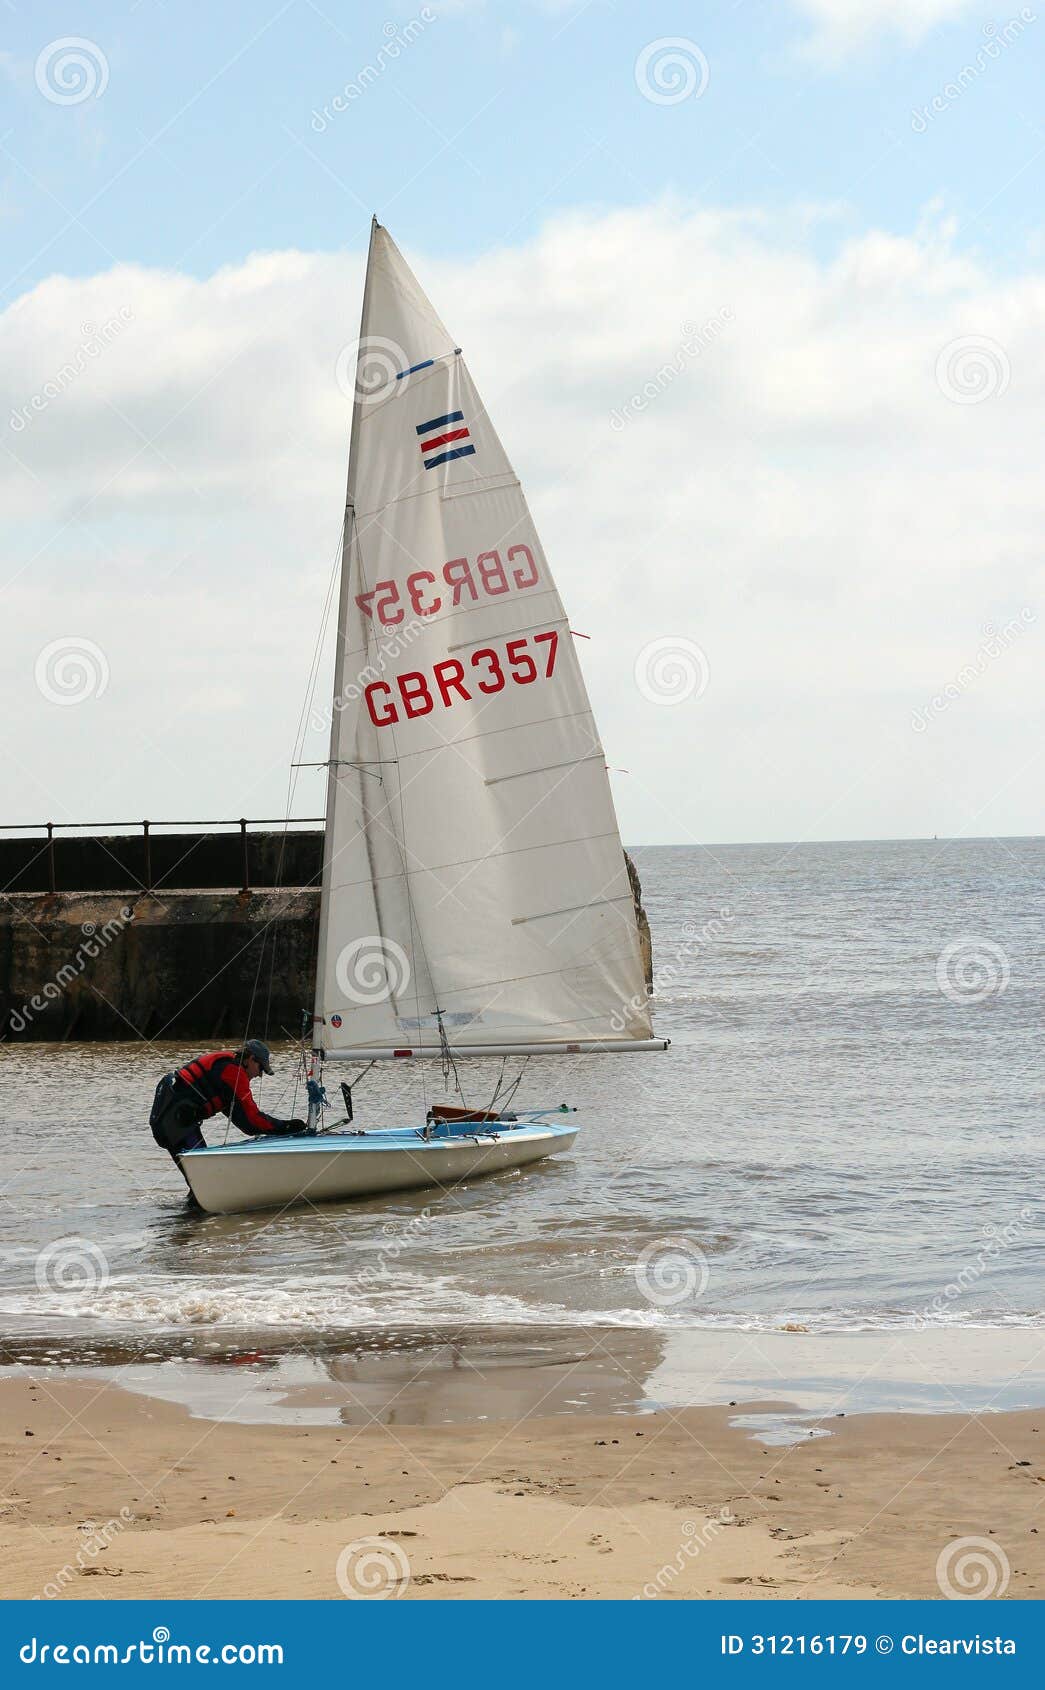 man with a yacht or sailing boat. editorial stock image